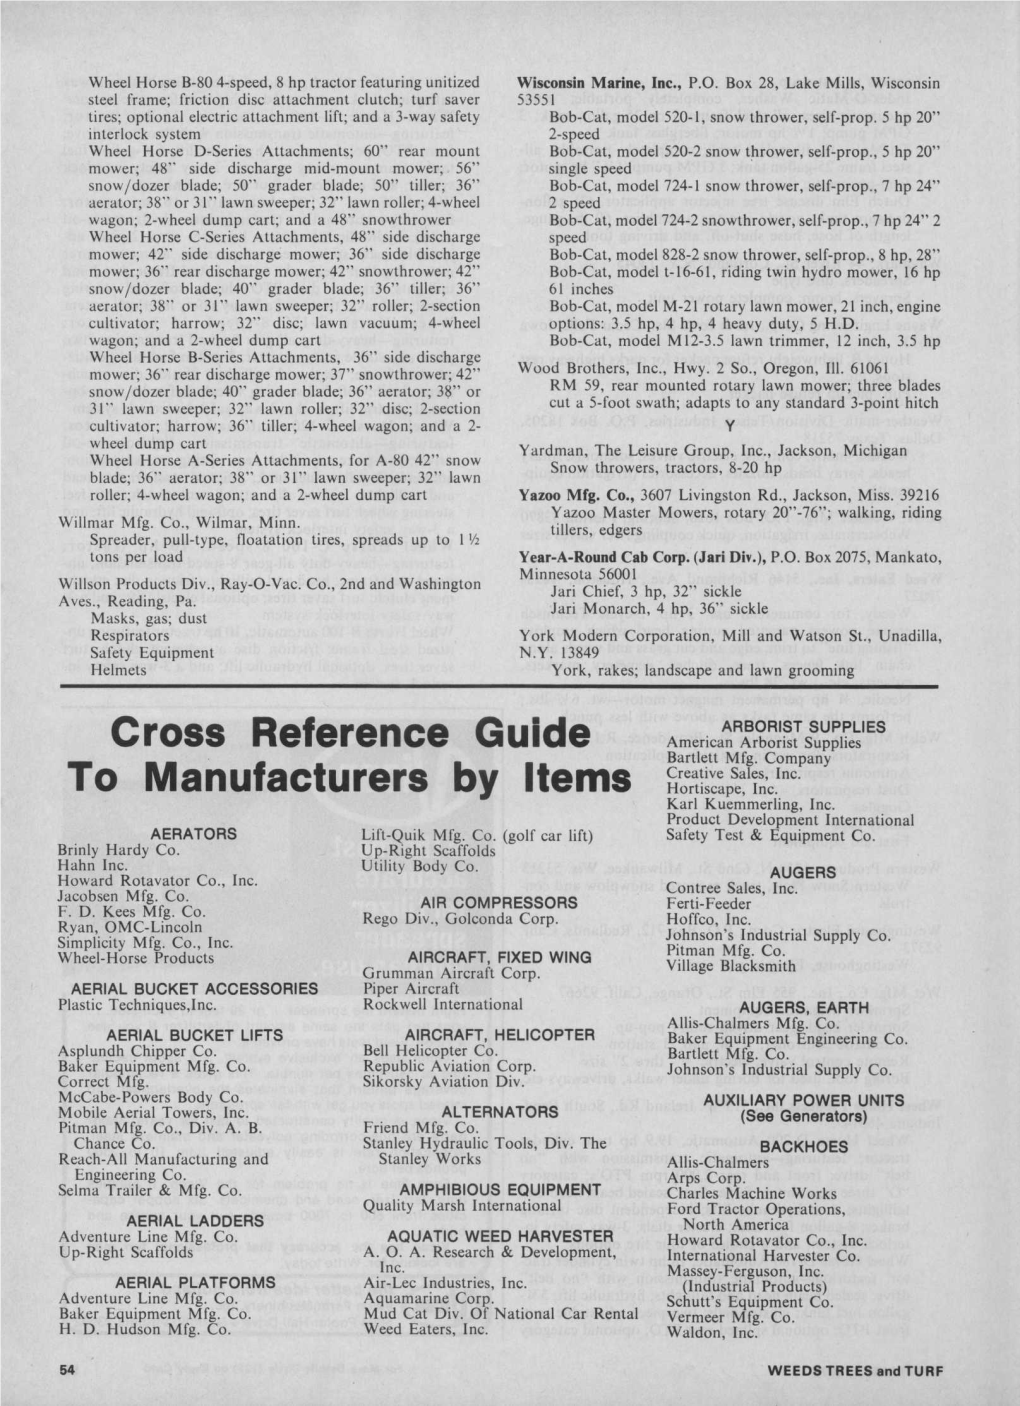 Cross Reference Guide to Manufacturers by Items